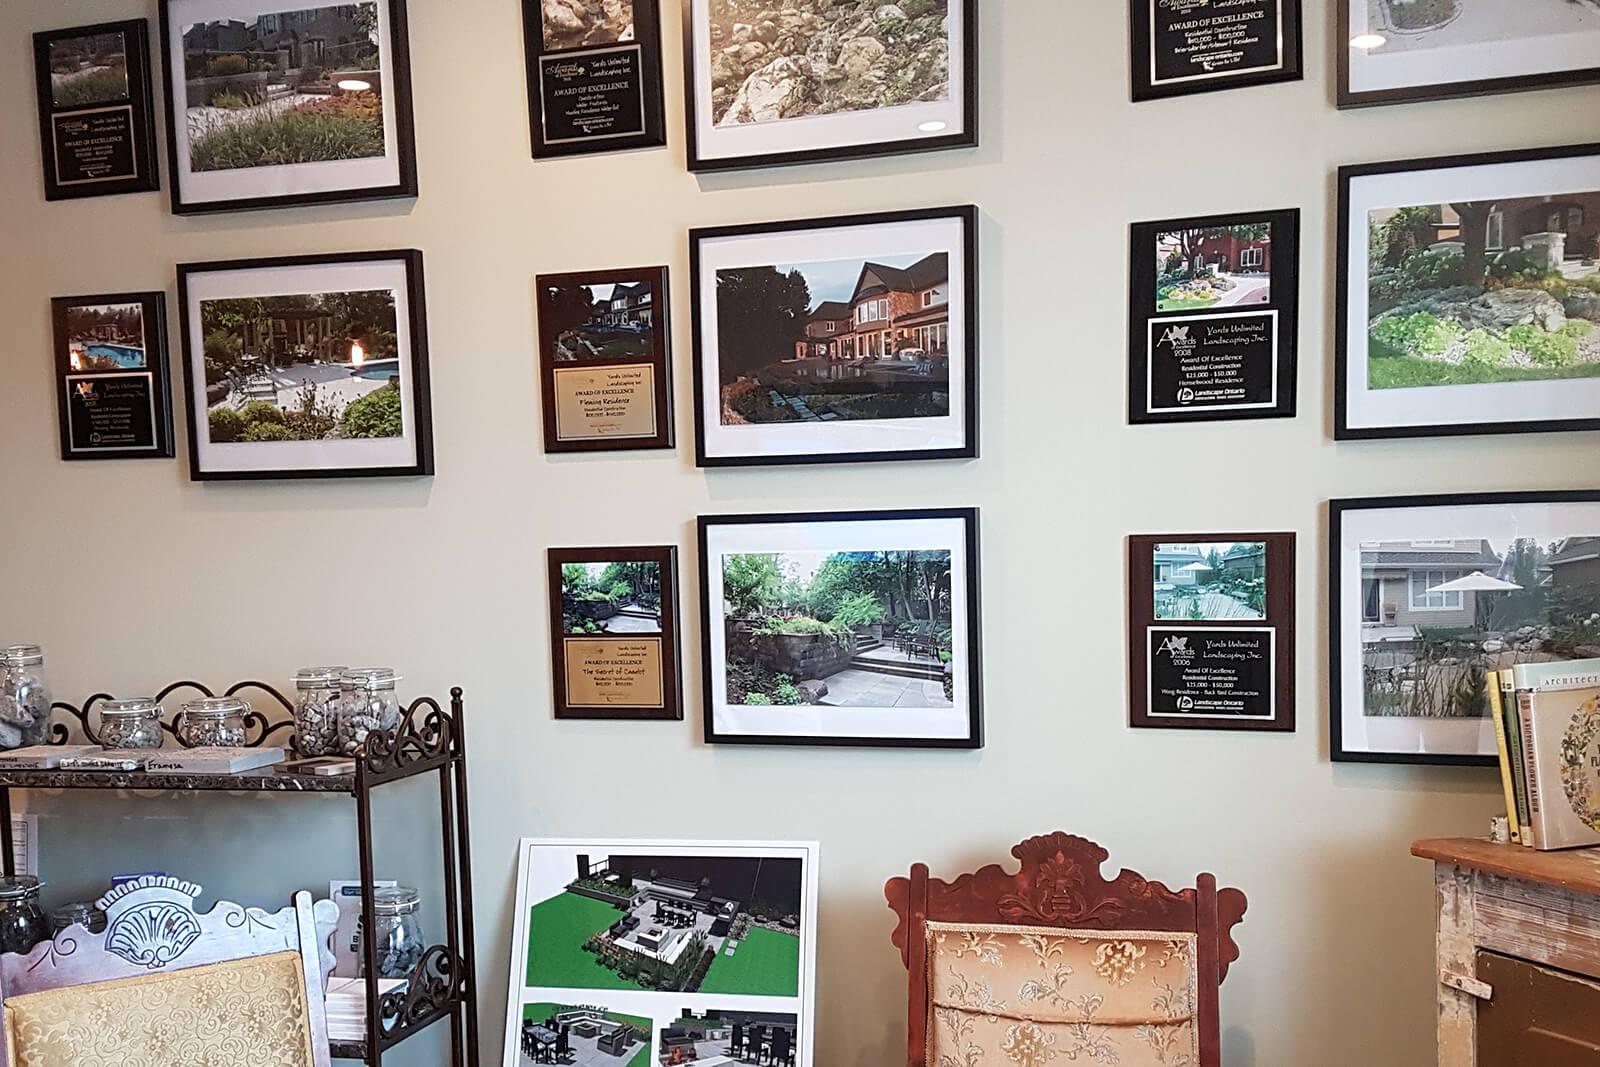 Yards Unlimited Landscaping proudly displays LO Awards plaques in its studio.